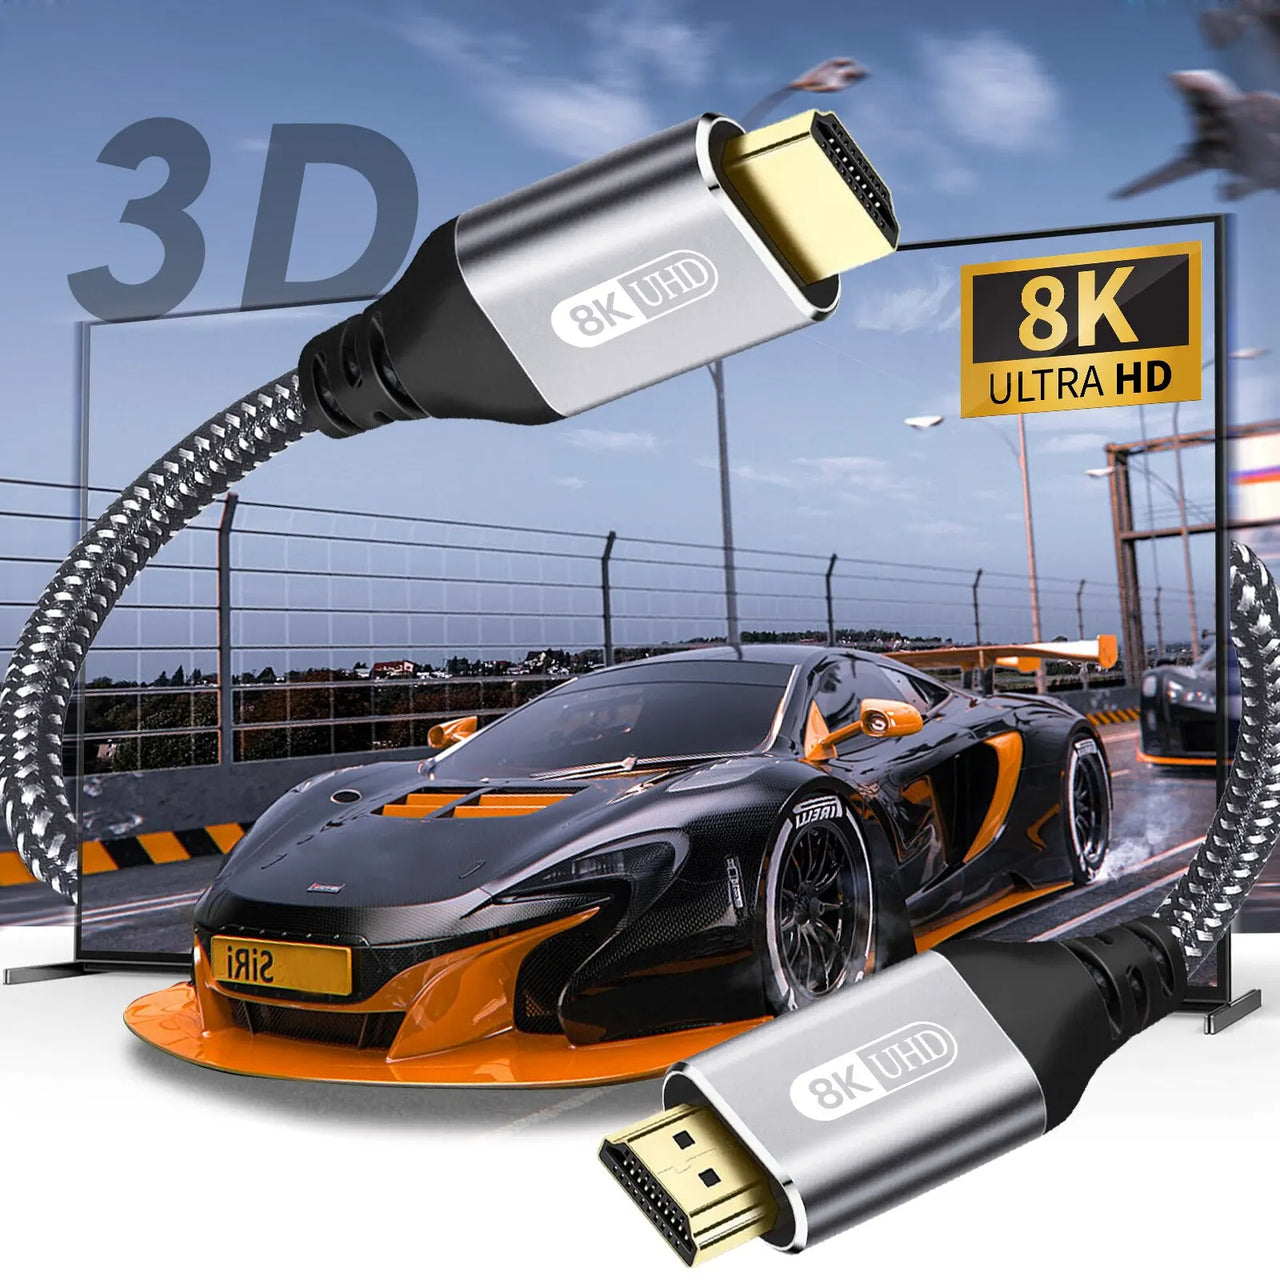 Premium 3m HDMI Cable 2.1 - Ultra High-Speed 8K 60Hz, 4K 120Hz, 48Gbps, EARC, ARC, HDCP, HDR, HDMI Cable, 3 Meter